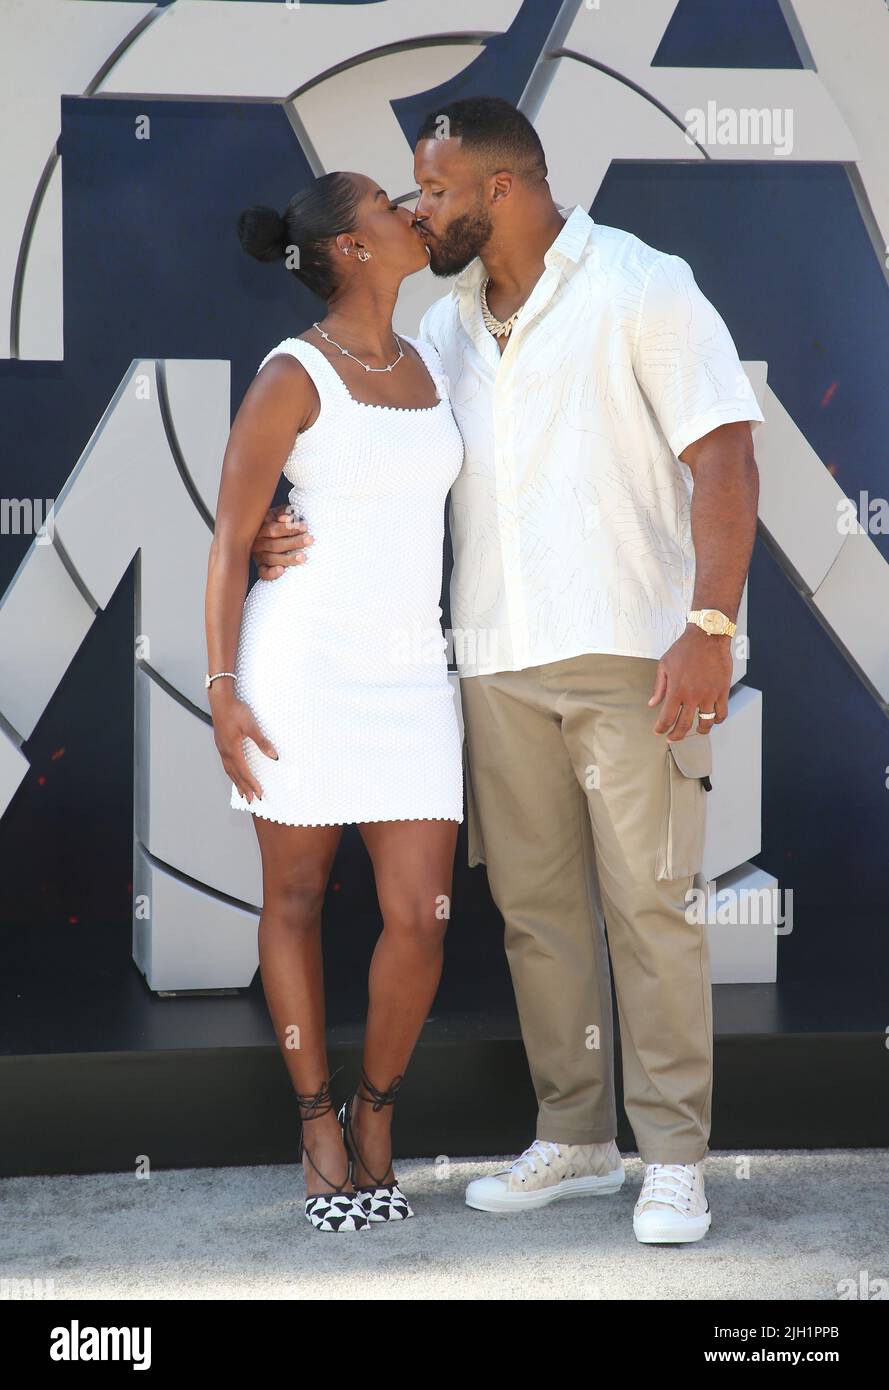 Hollywood, Ca. 13th July, 2022. Erica Donald, Aaron Donald at the Netflix Premiere Of The Gray Man at the TCL Chinese Theatre on July 13, 2022 in Hollywood, California. Credit: Faye Sadou/Media Punch/Alamy Live News Stock Photo